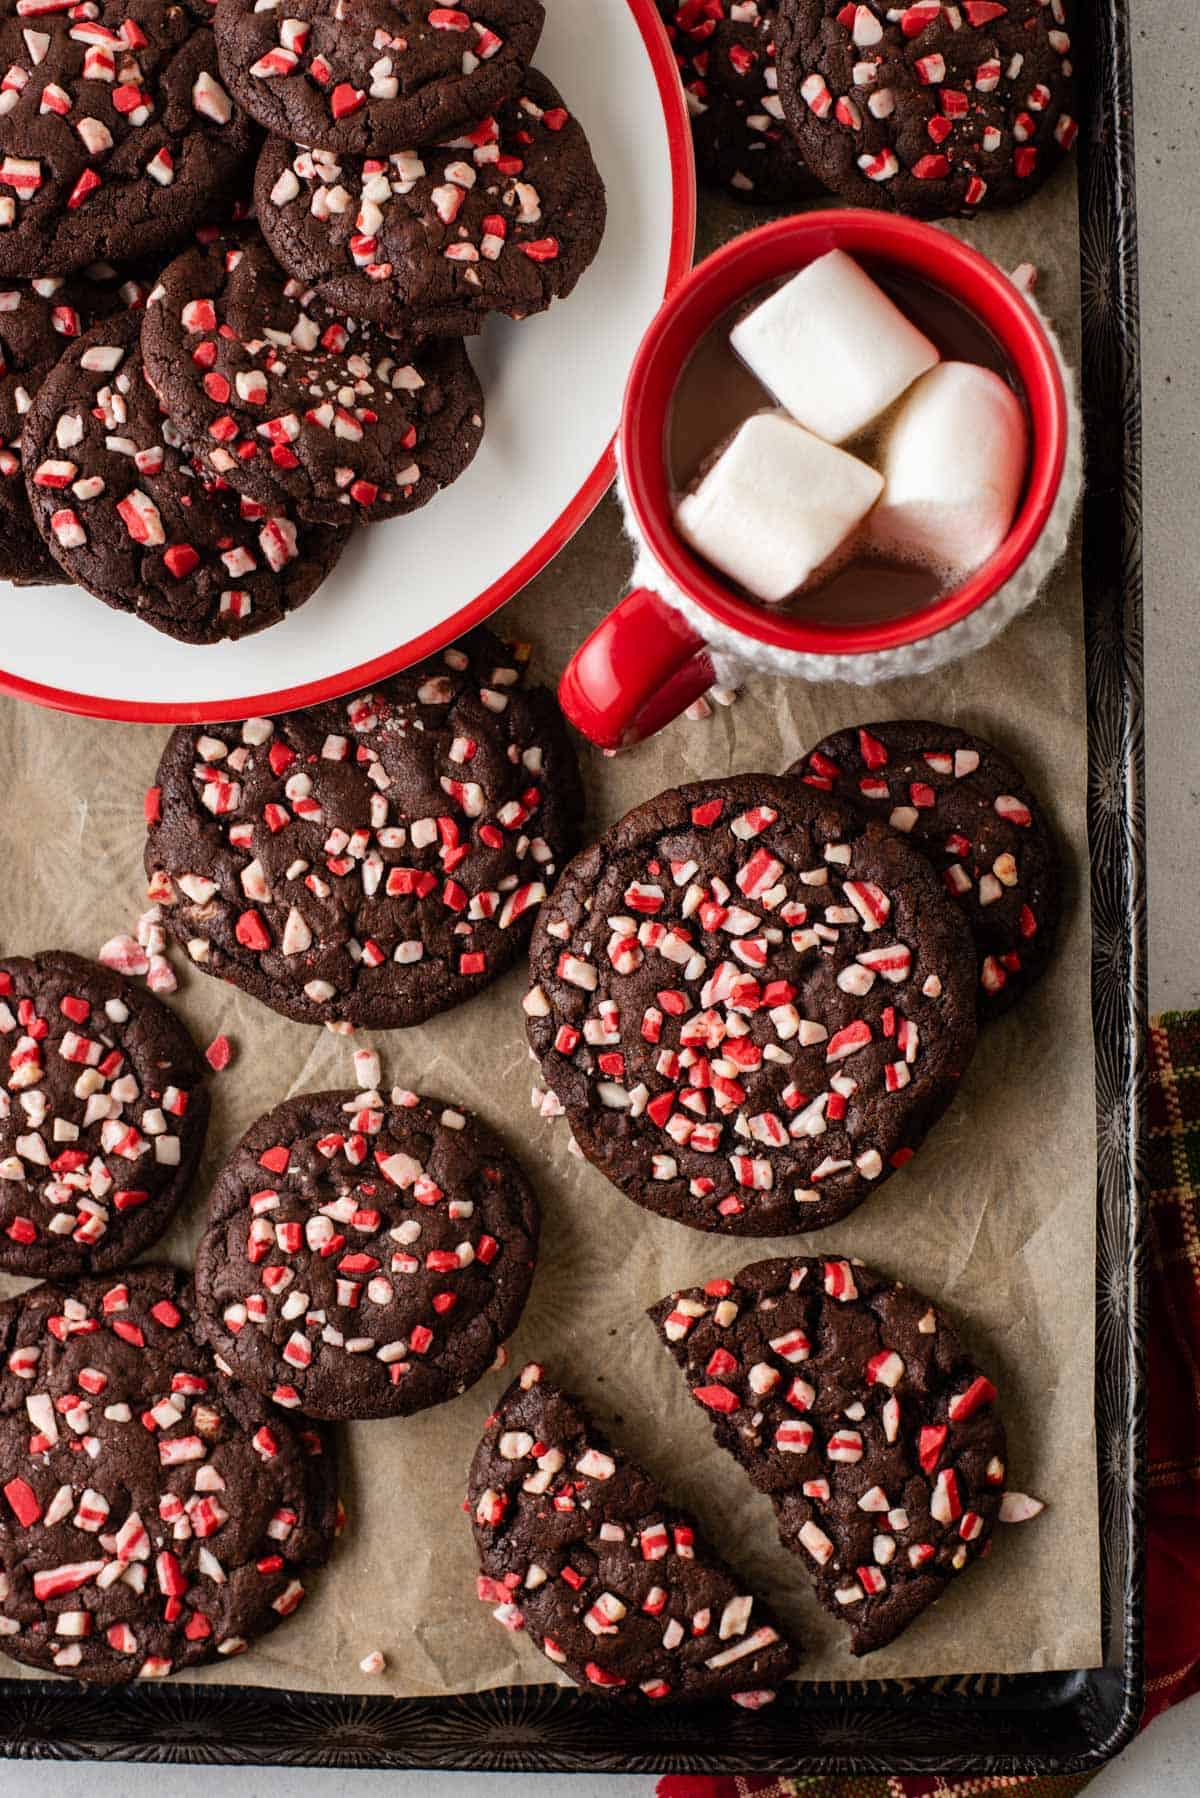 Overhead view of chocolate peppermint cookies on a baking sheet